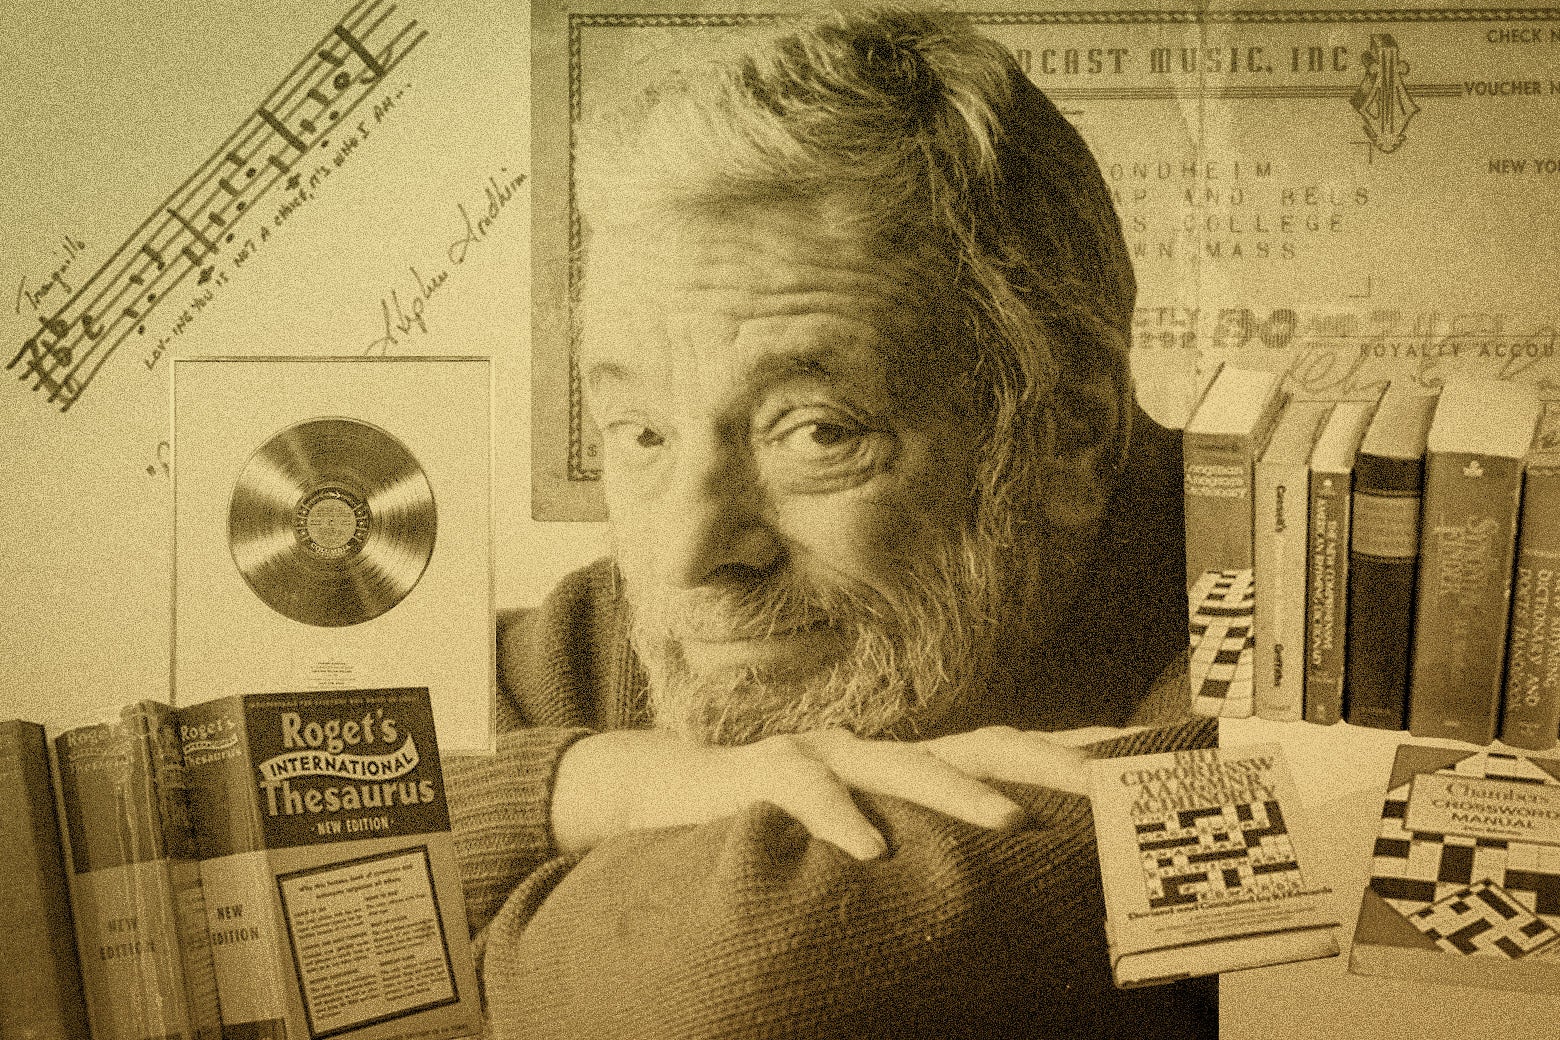 A sepia-toned collage of Stephen Sondheim with his things from the auction, including thesauruses, scripts, records, and the check.